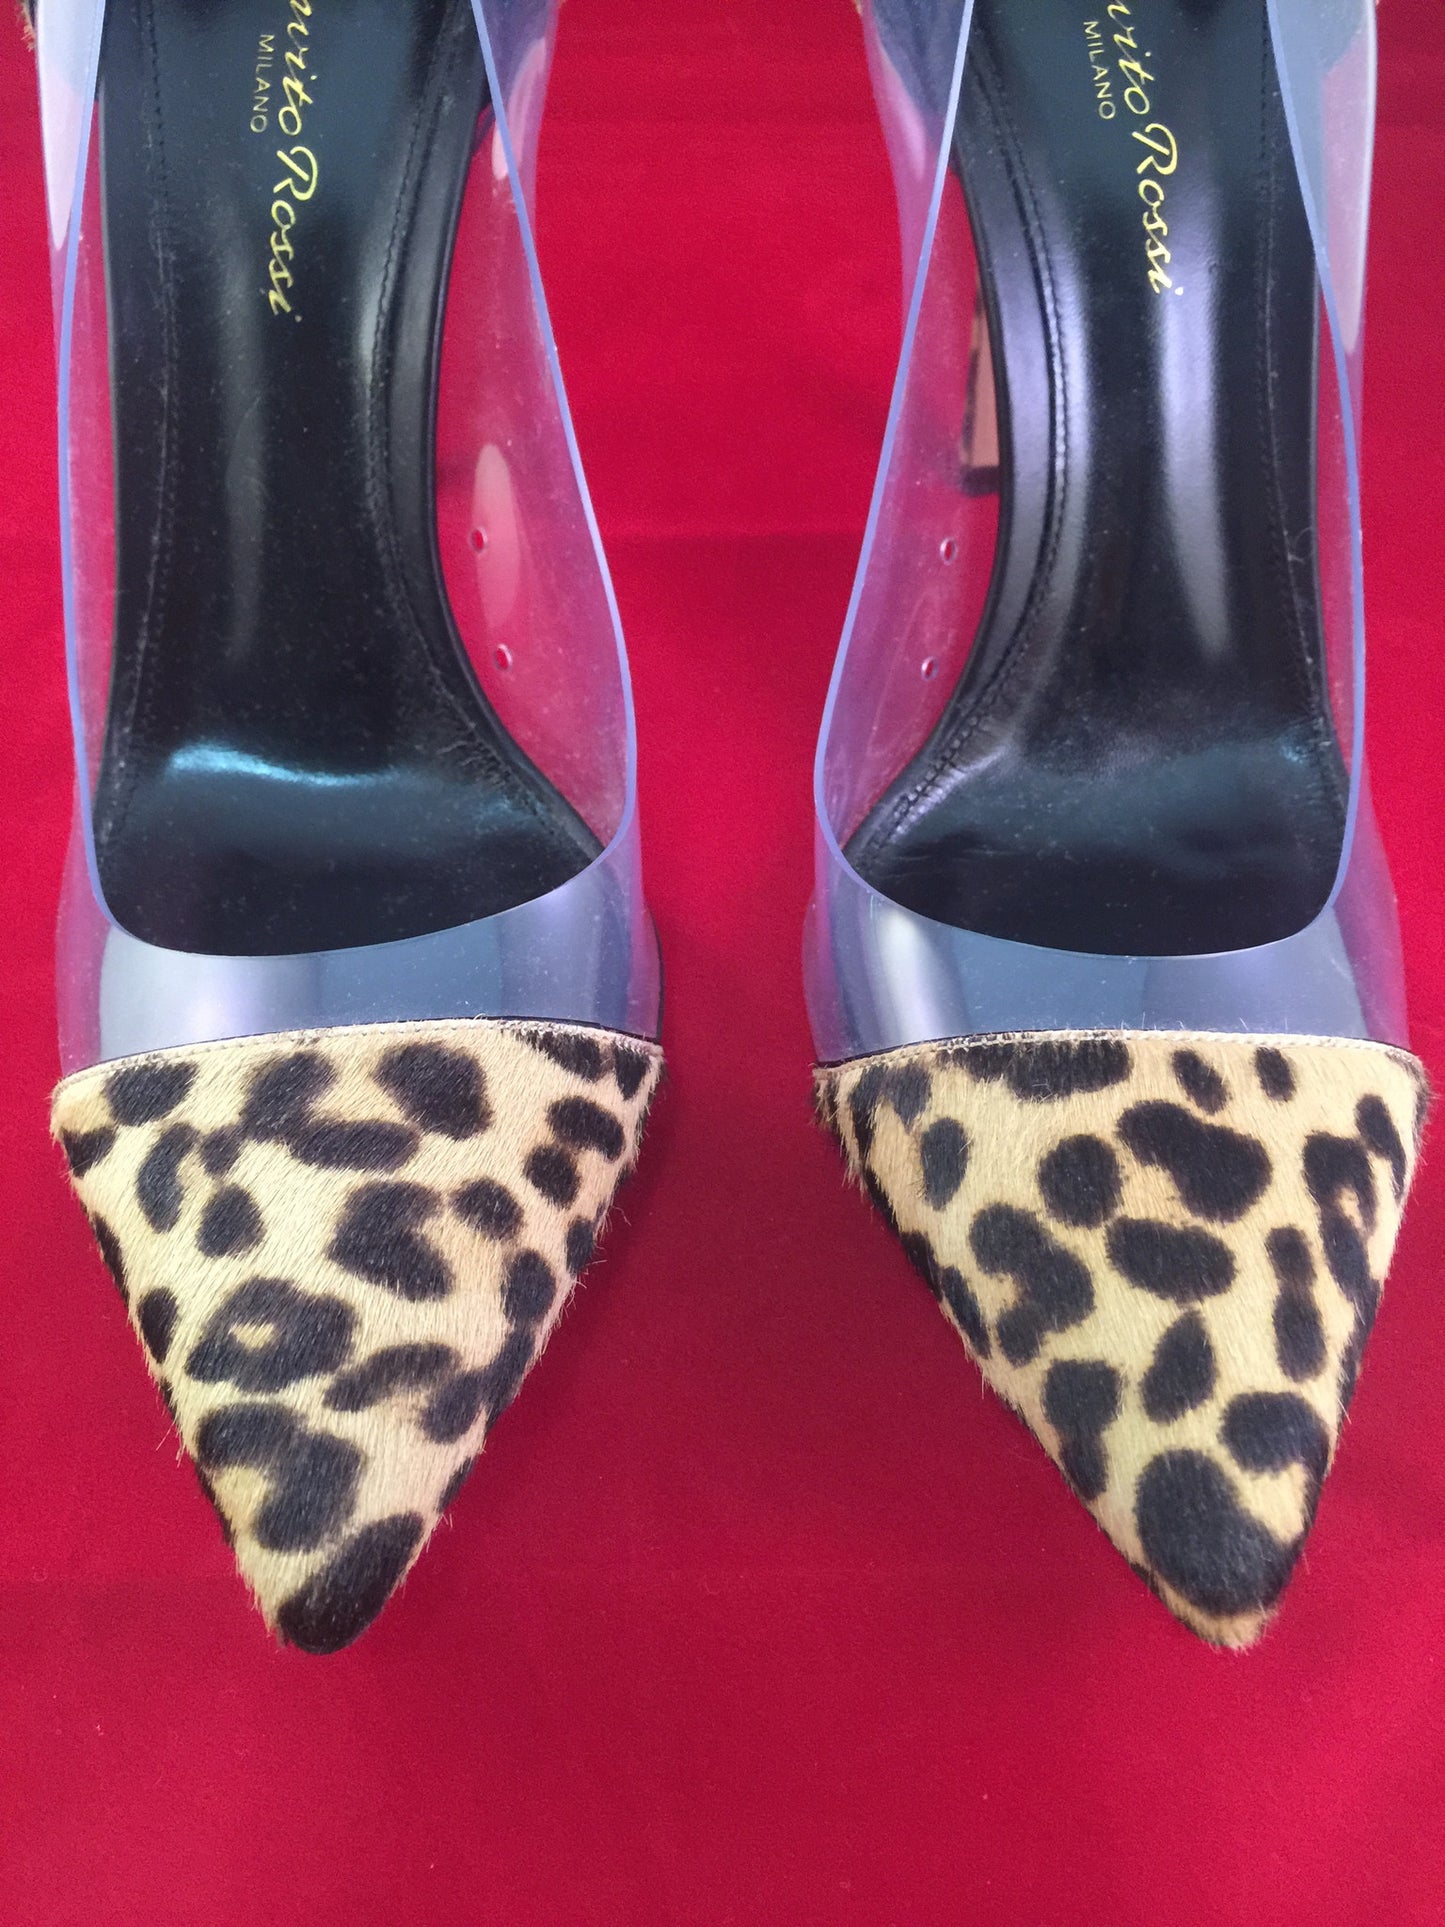 GIANVITO ROSSI 100 LEOPARD PONY HAIR CLASSIC PVC TRANSPARENT PUMPS SHOES WORN INDOORS